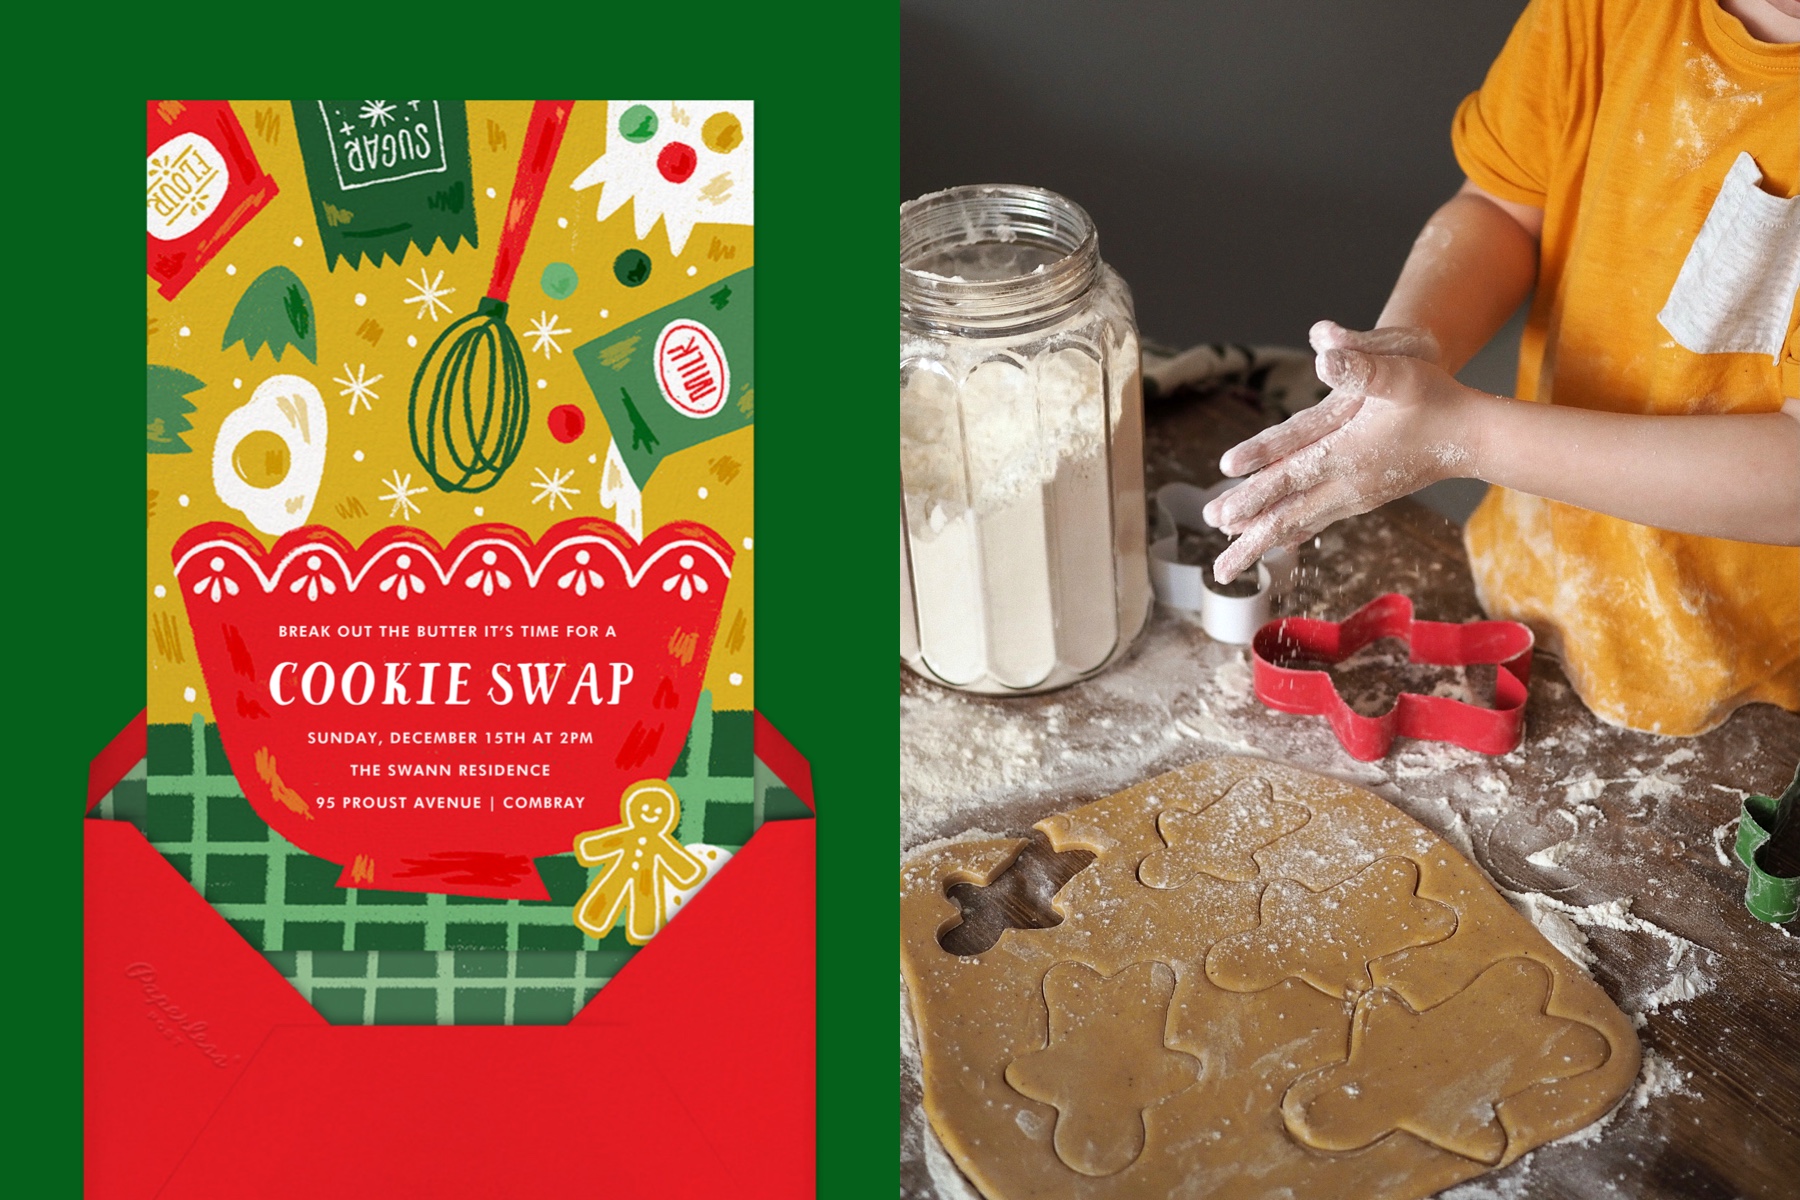 Left: Cookie swap invitation with red envelope. Right: Someone cuts gingerbread cookies out of dough. 